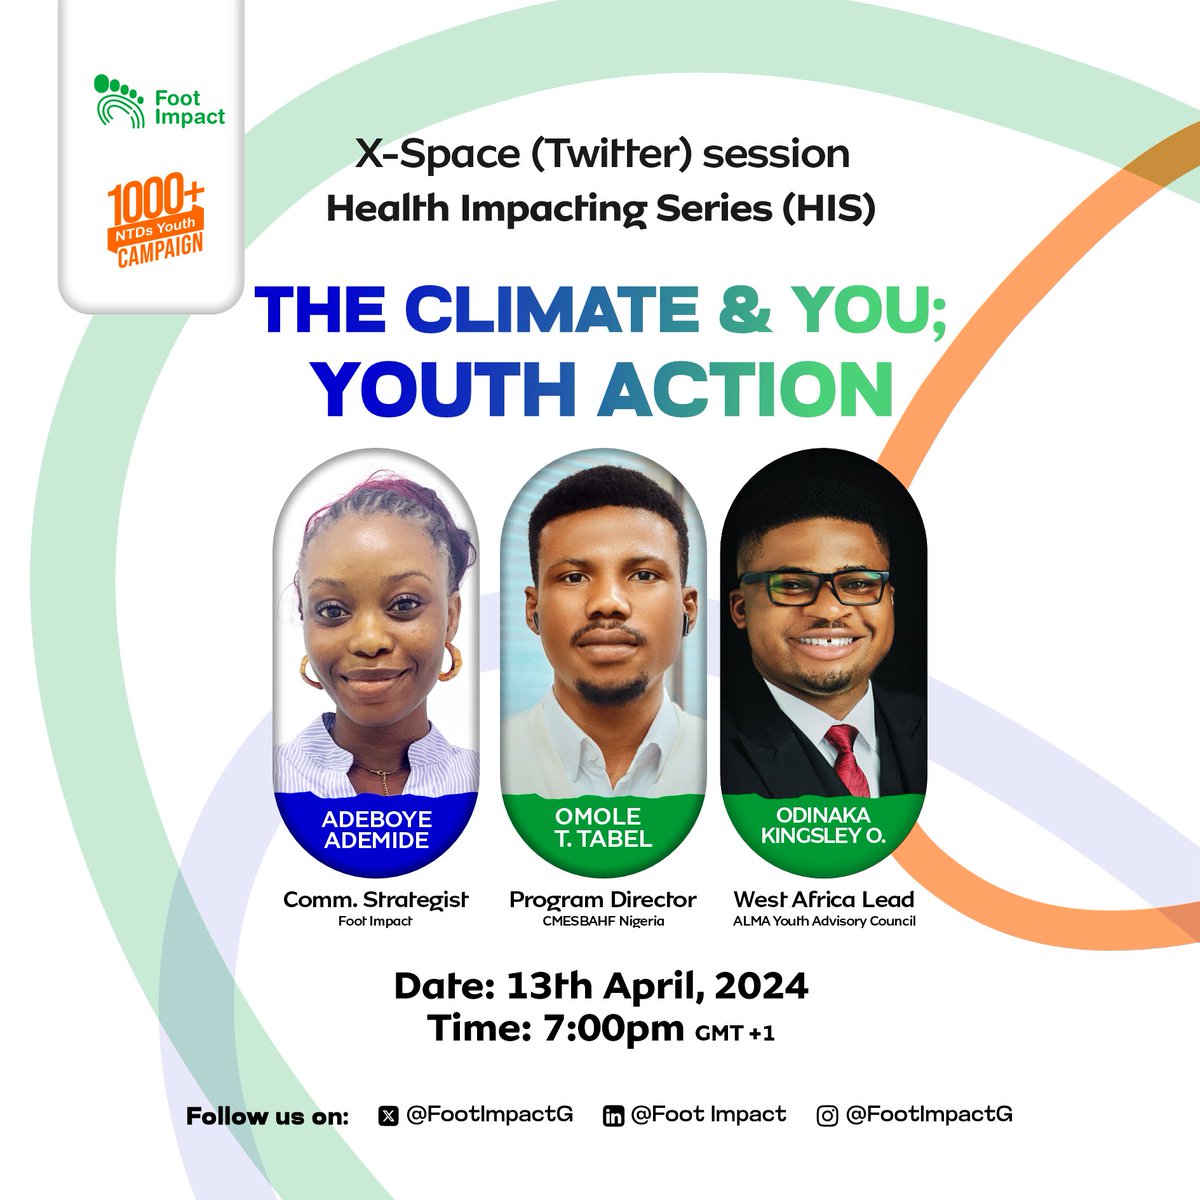 April 13th is the date🎊... We are ready... Join us for another Health Impact Series by Foot Impact on Twitter space x.com/i/spaces/1OyKA… Time: 7:00pm (GMT+1) Topic: The Climate & You; Youth Action #theclimateandyou #climatechange #BeatNTDsNaija #BeatNTDs #EndNTDs